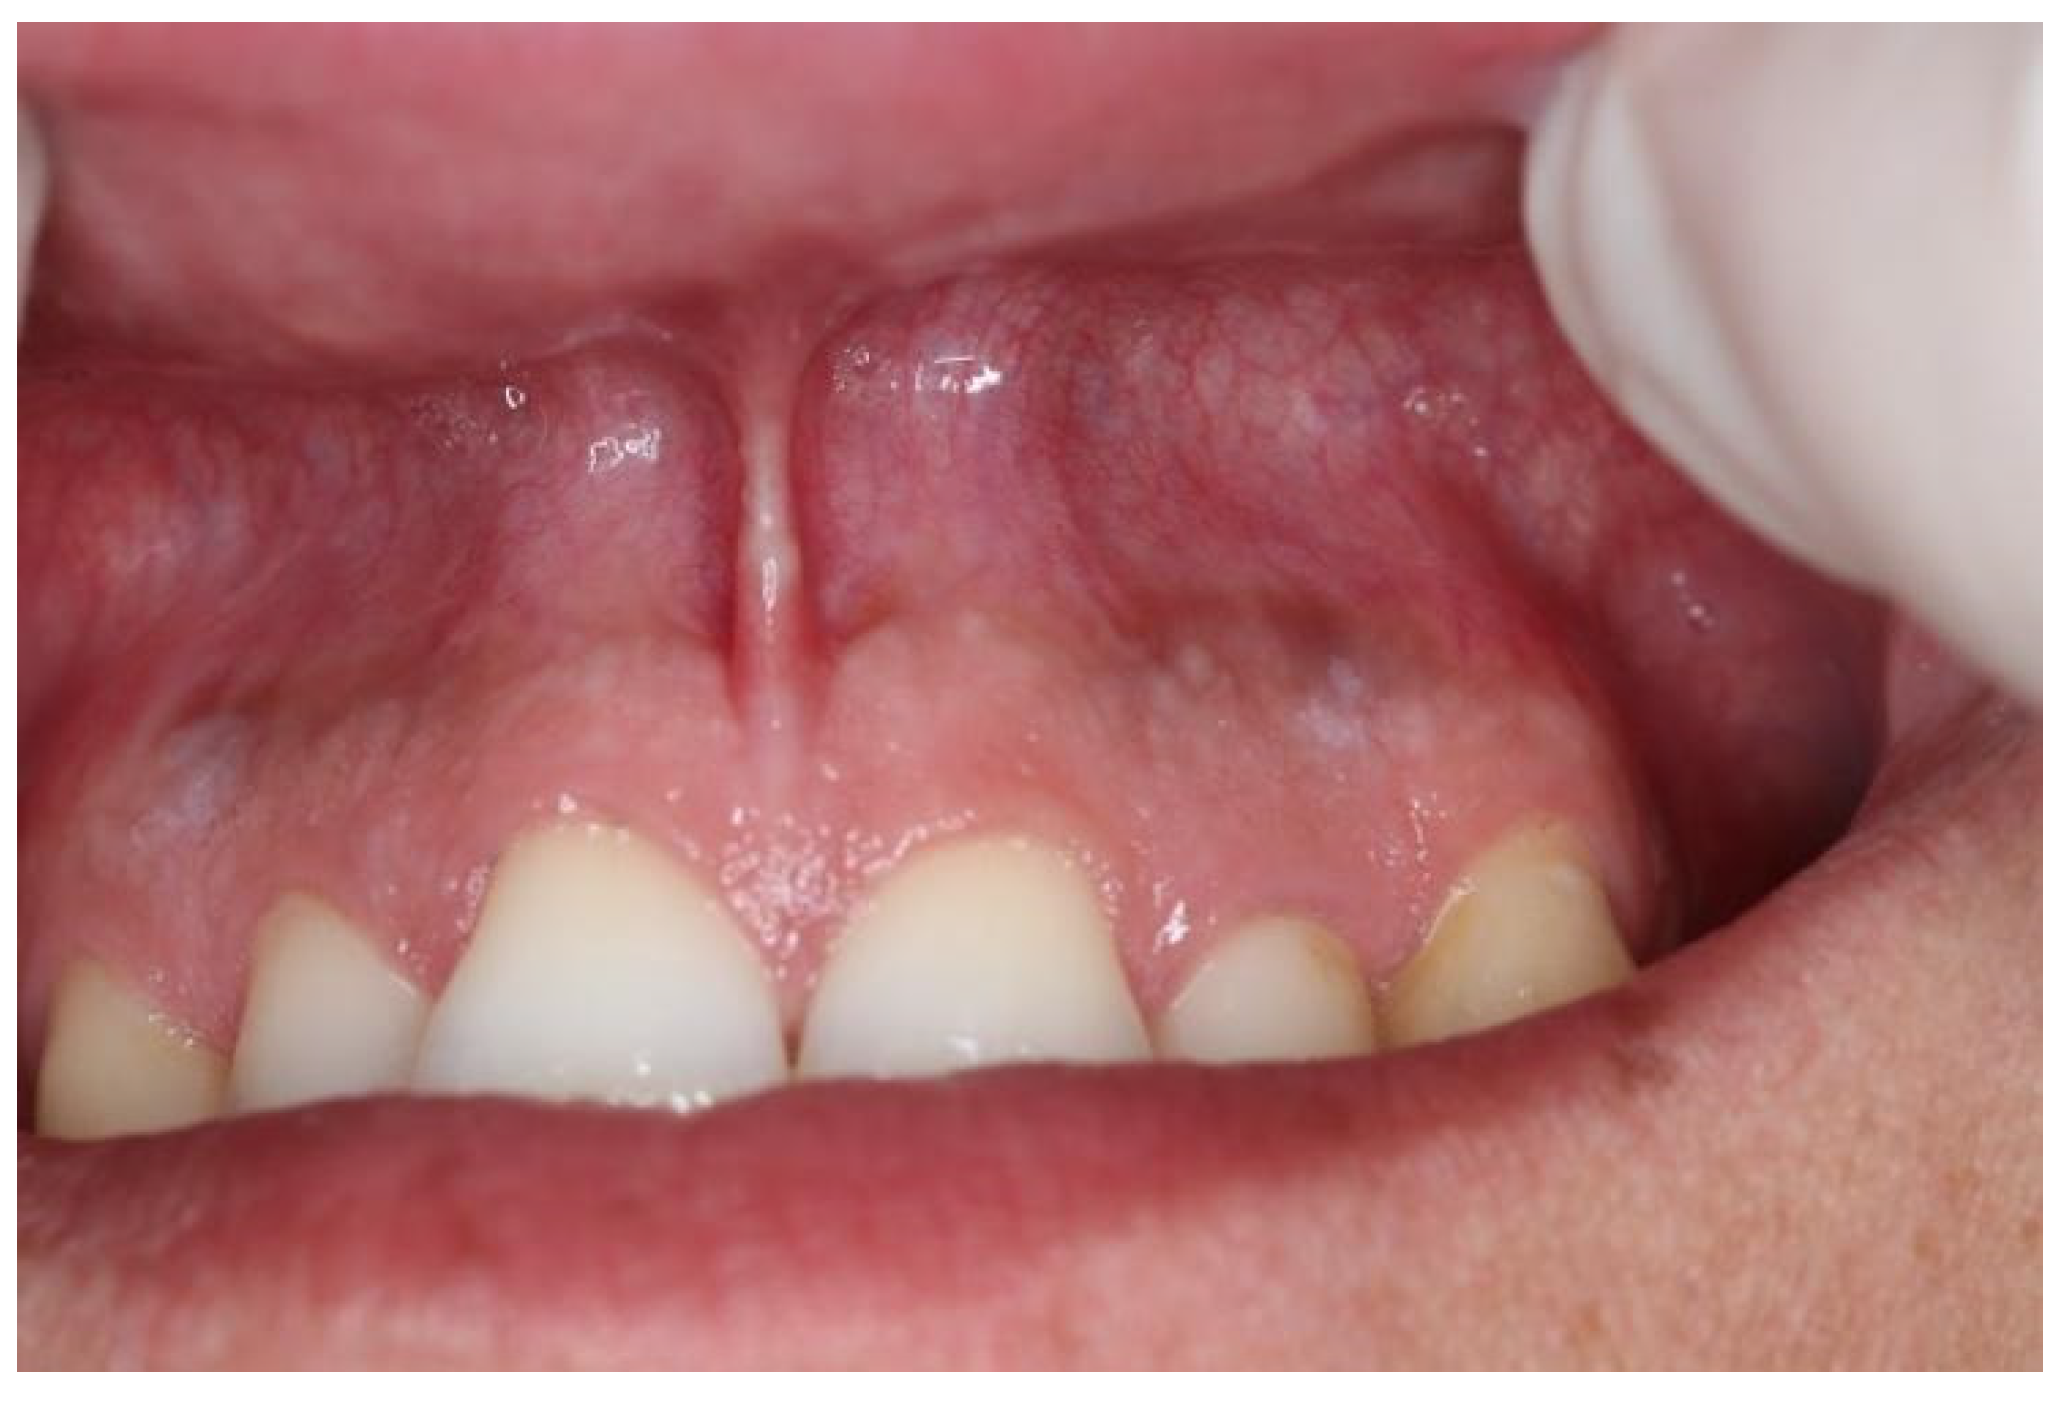 Dentistry Journal | Free Full-Text | The Correlation of Swedish Snus,  Nicotine Pouches and Other Tobacco Products with Oral Mucosal Health and  Salivary Biomarkers